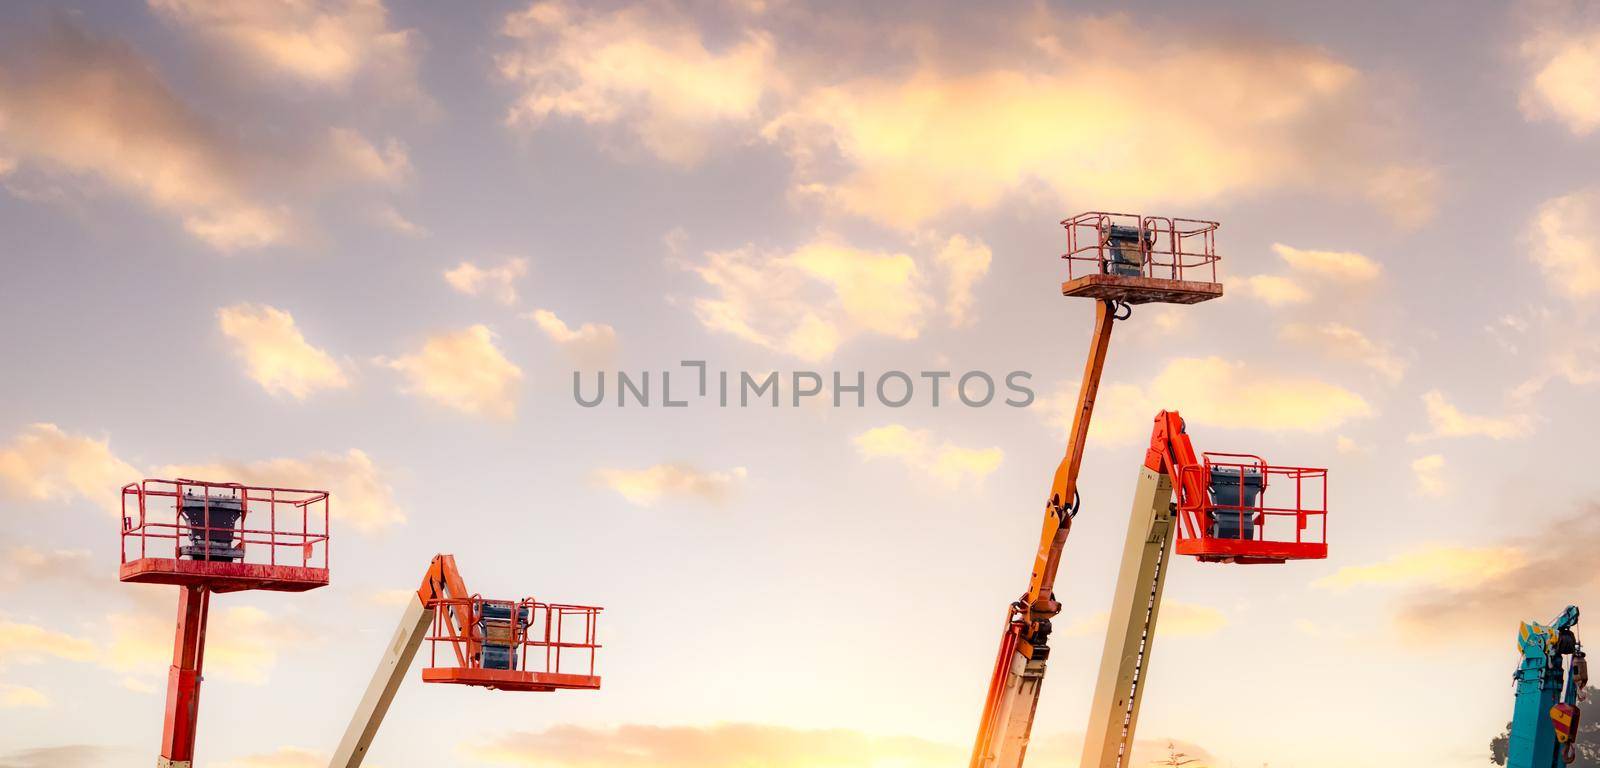 Articulated boom lift. Aerial platform lift. Telescopic boom lift against the sky. Mobile construction crane for rent and sale. Maintenance and repair hydraulic boom lift service. Crane dealership.  by Fahroni